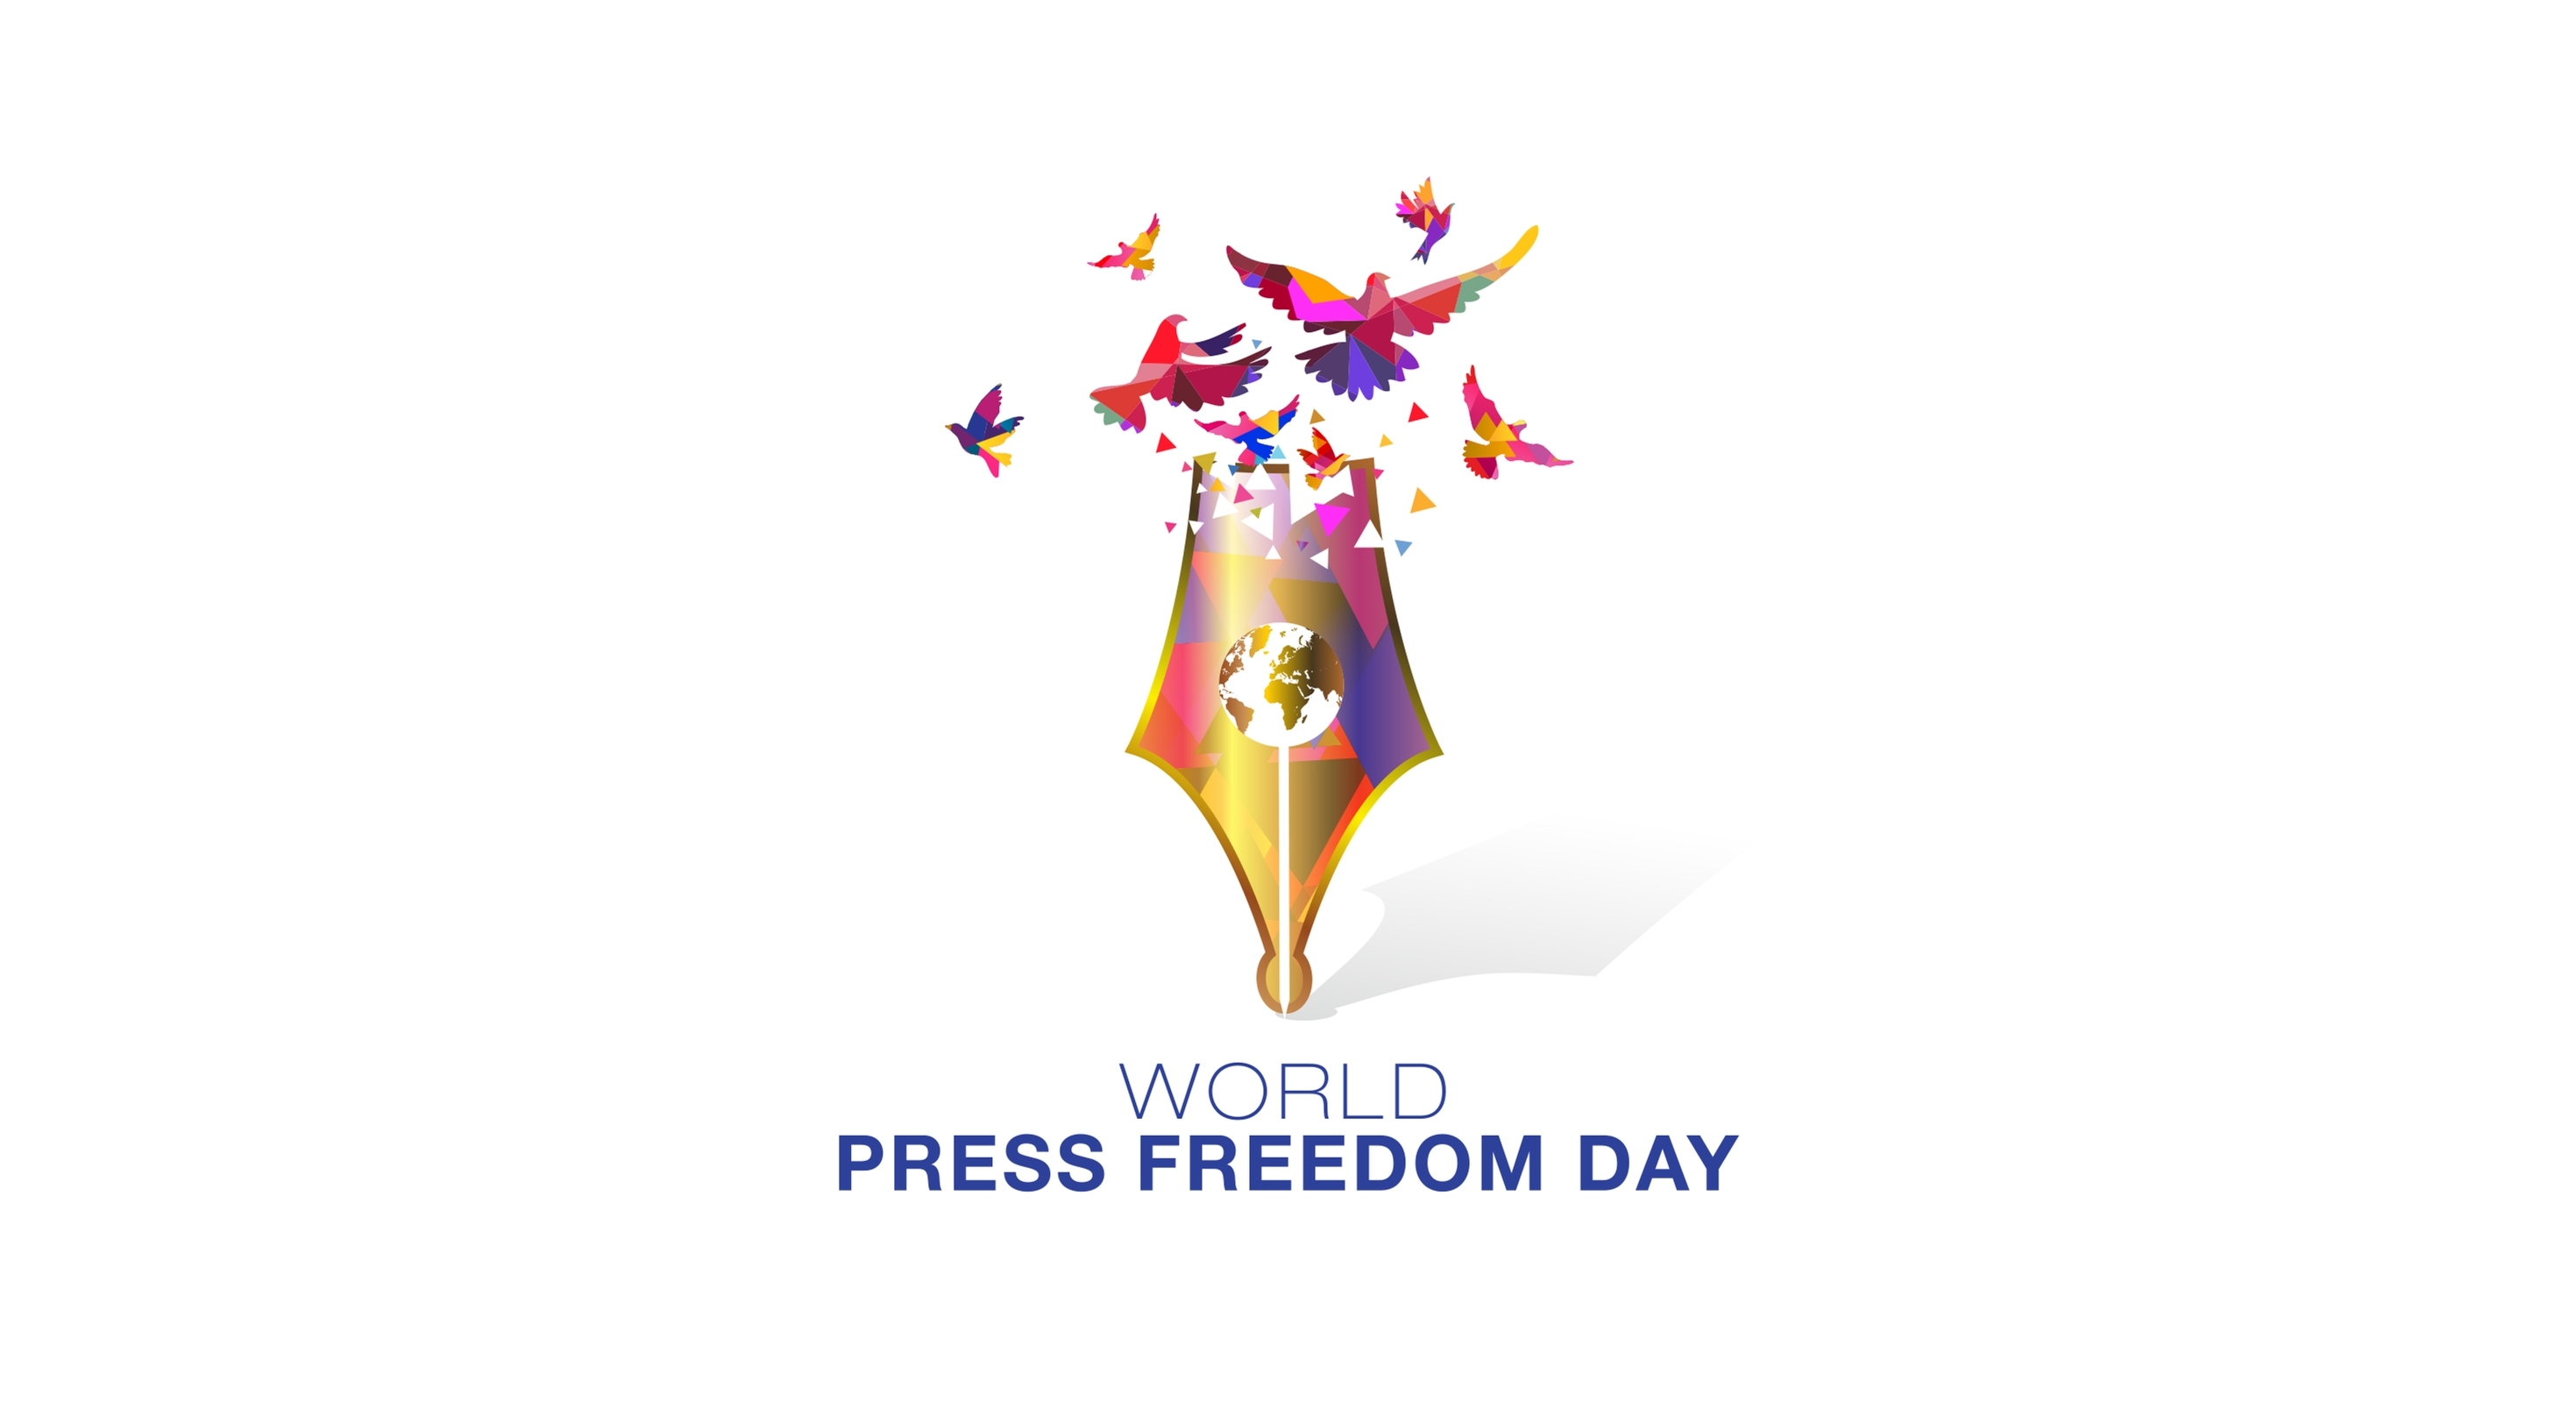 RSF, press freedom put to the test / Europe / areas / Home